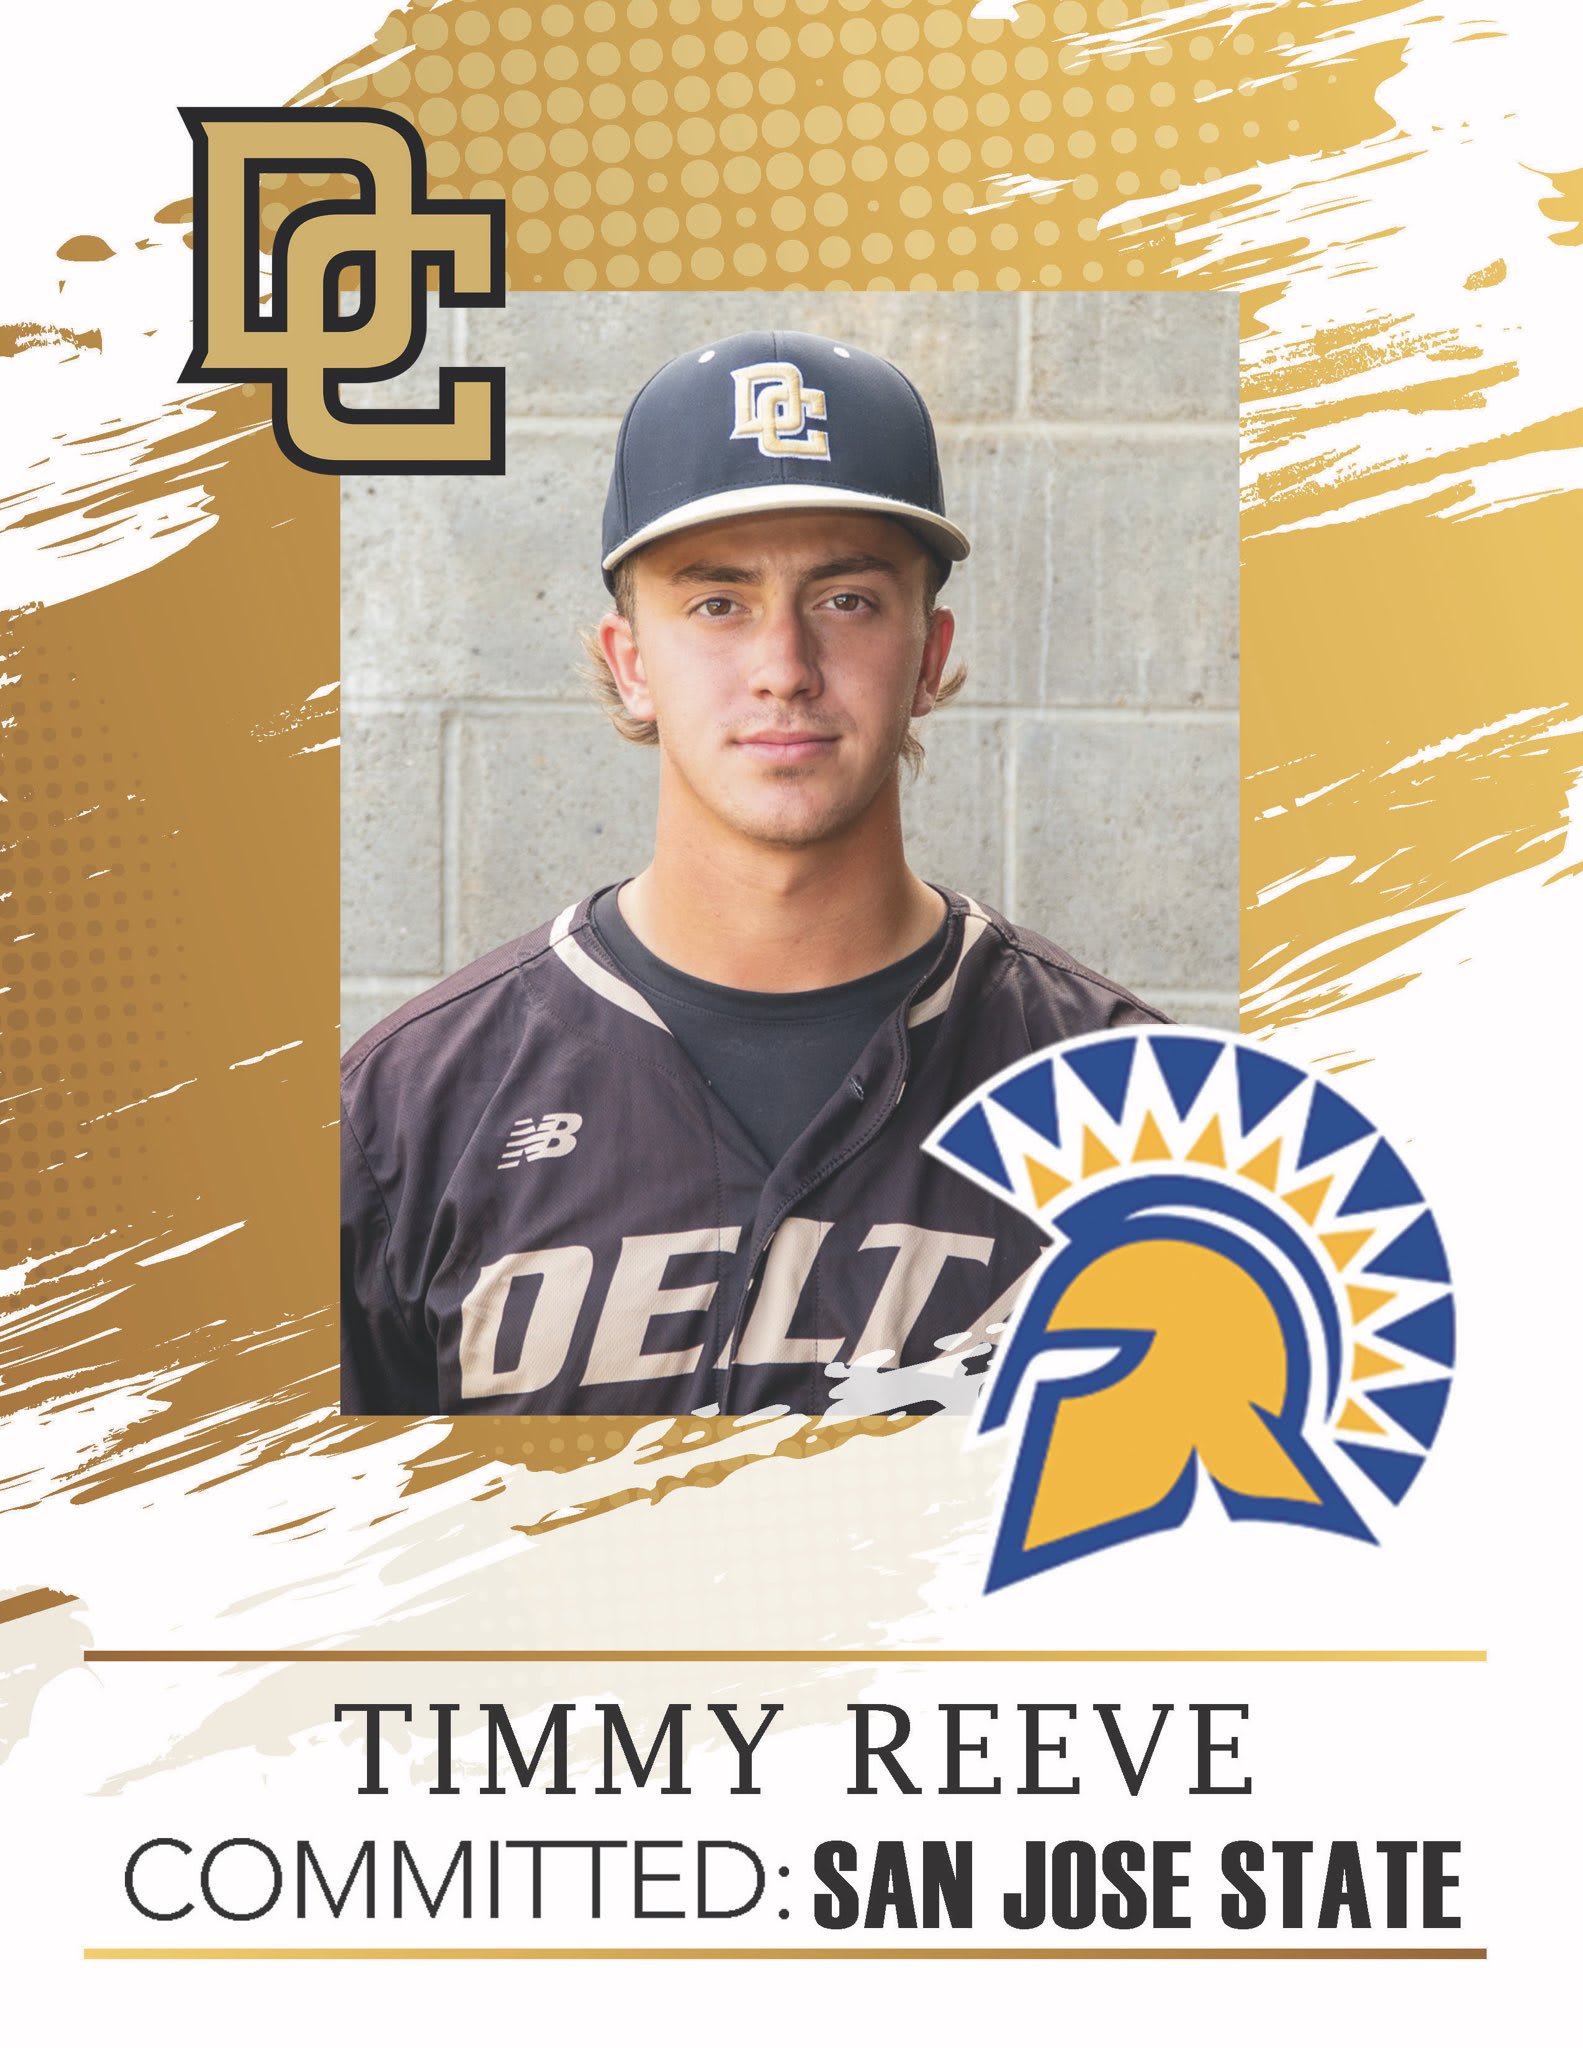 Timmy Reeve